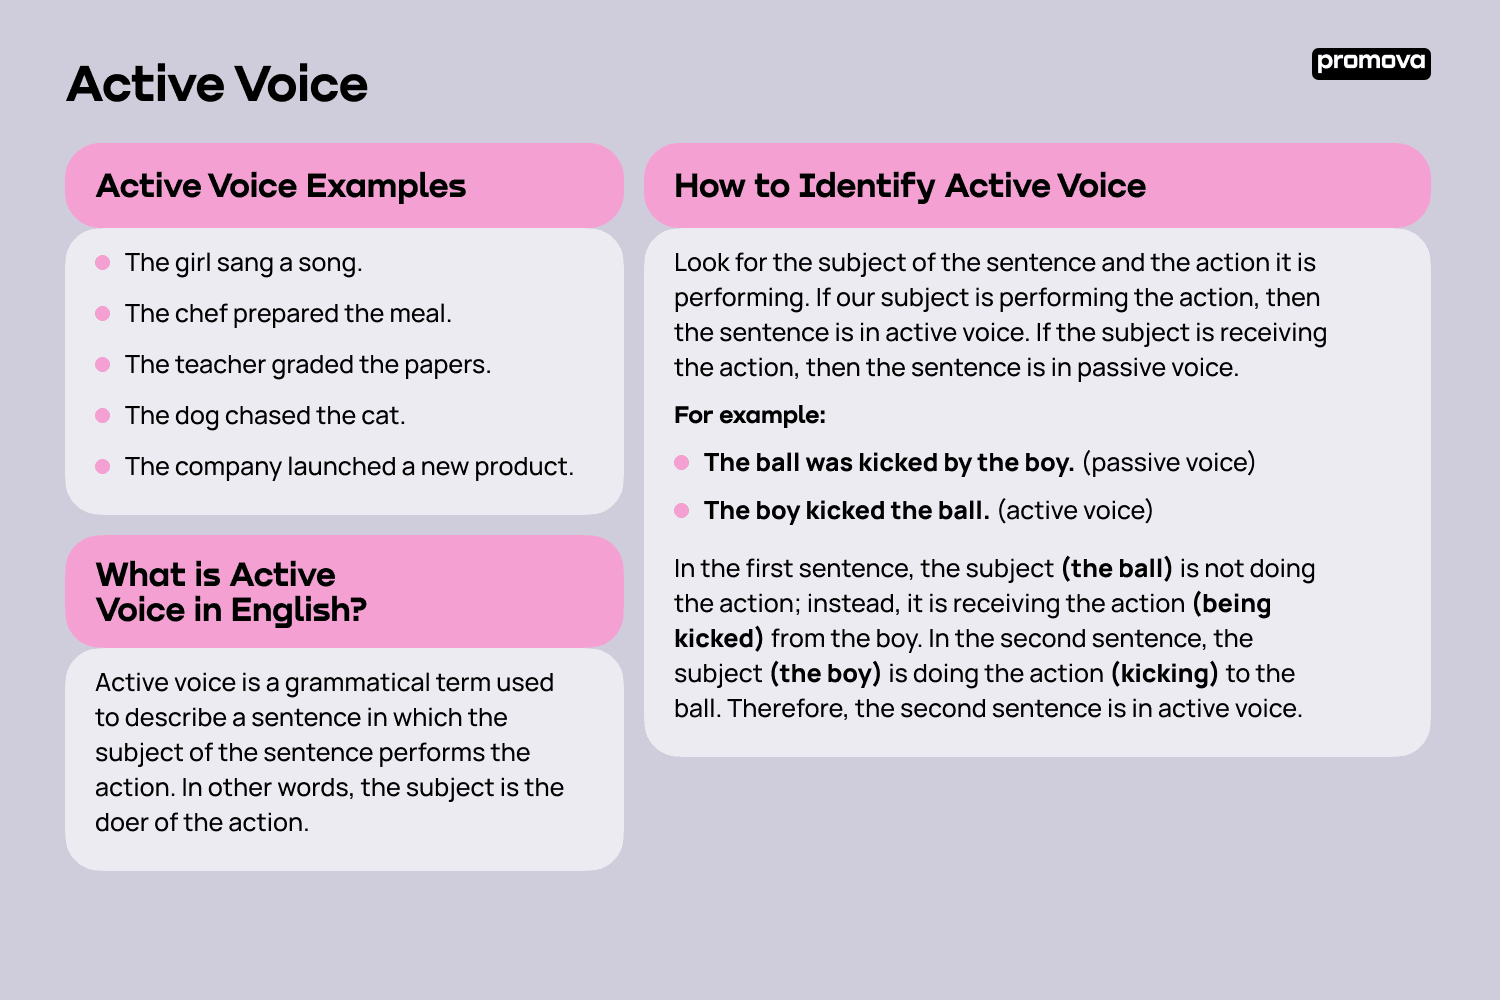 Active Voice Examples